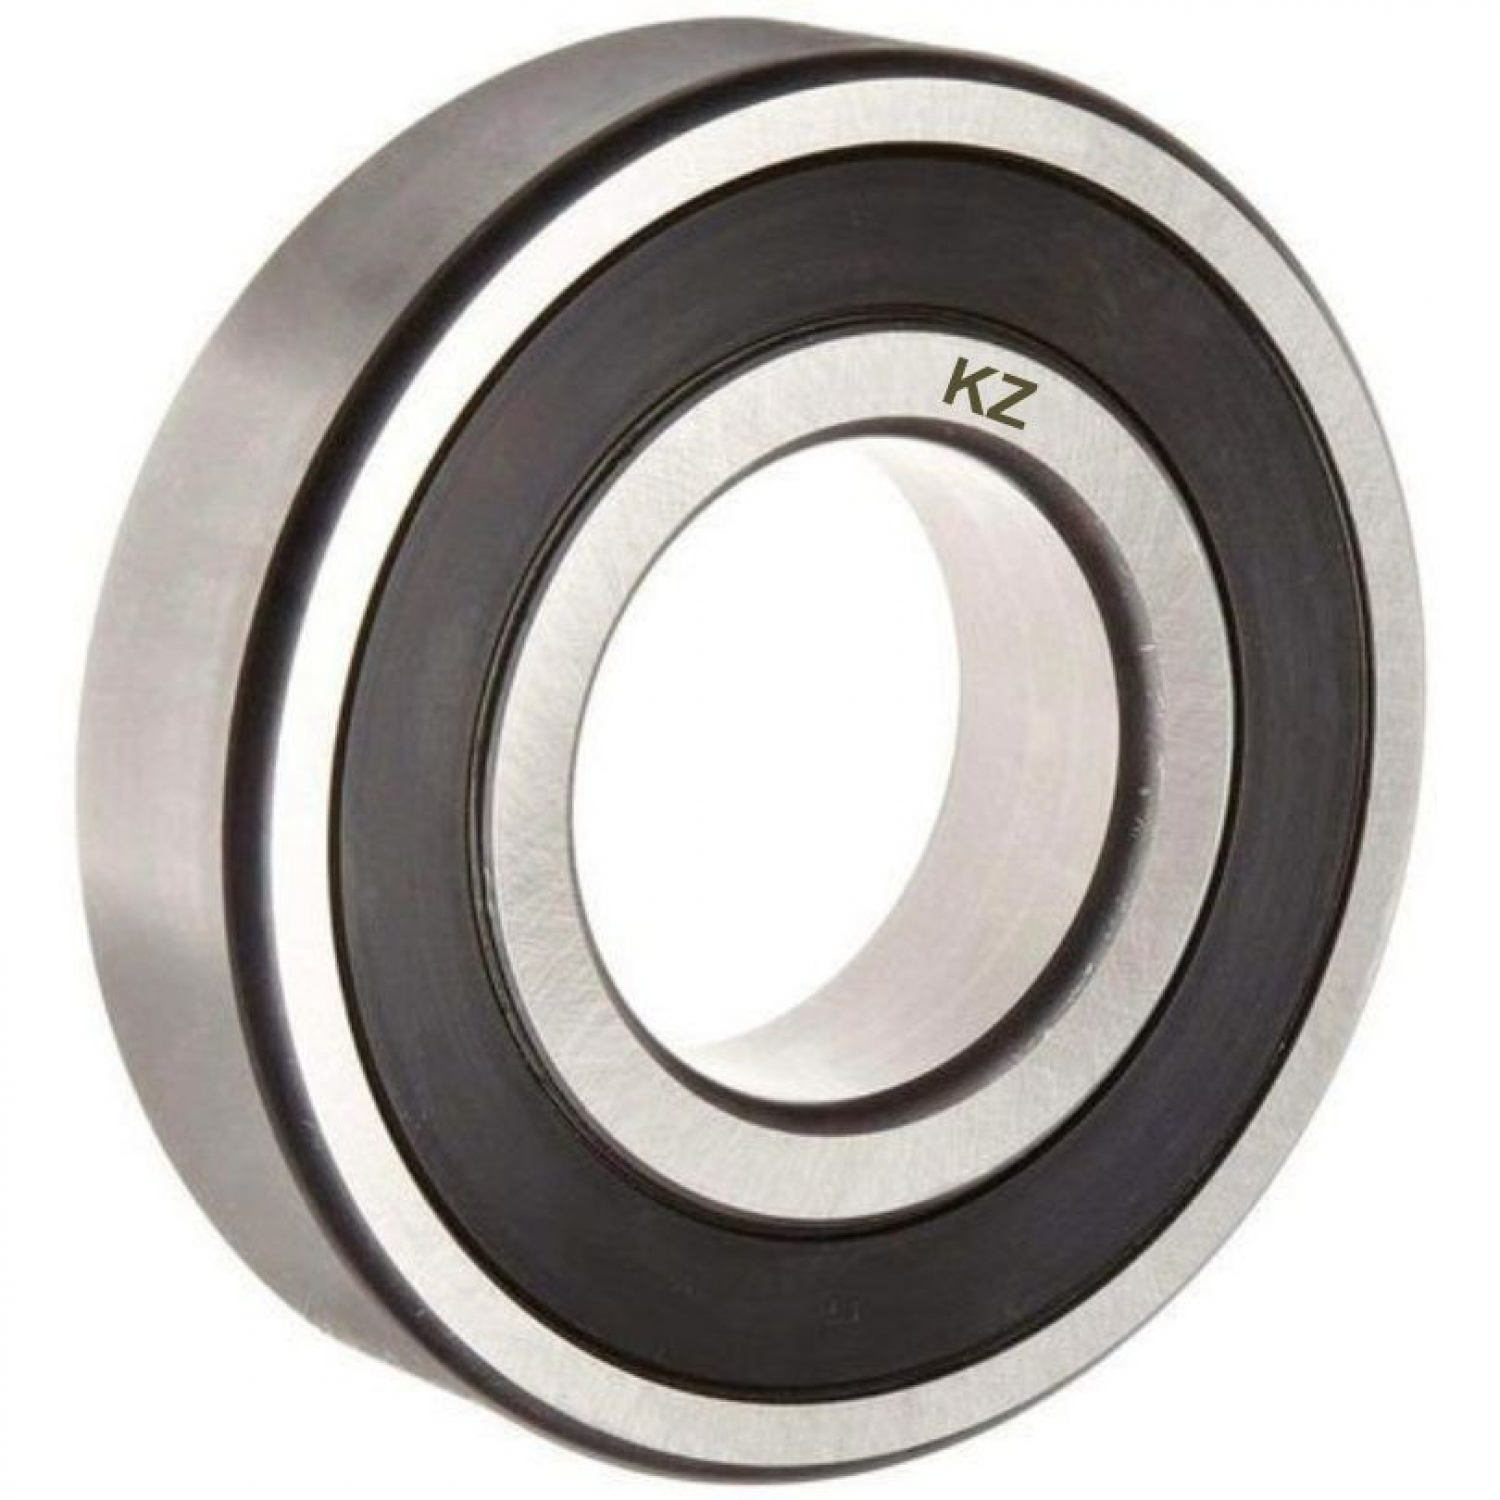 Deep Groove Ball Bearing - Deep groove ball bearings are among the most widely used type of bearings in the world. They can operate at high speeds and can carry radial and (limited) axial loads. They are commonly used in electric motors, compressors, fans, and conveyors.